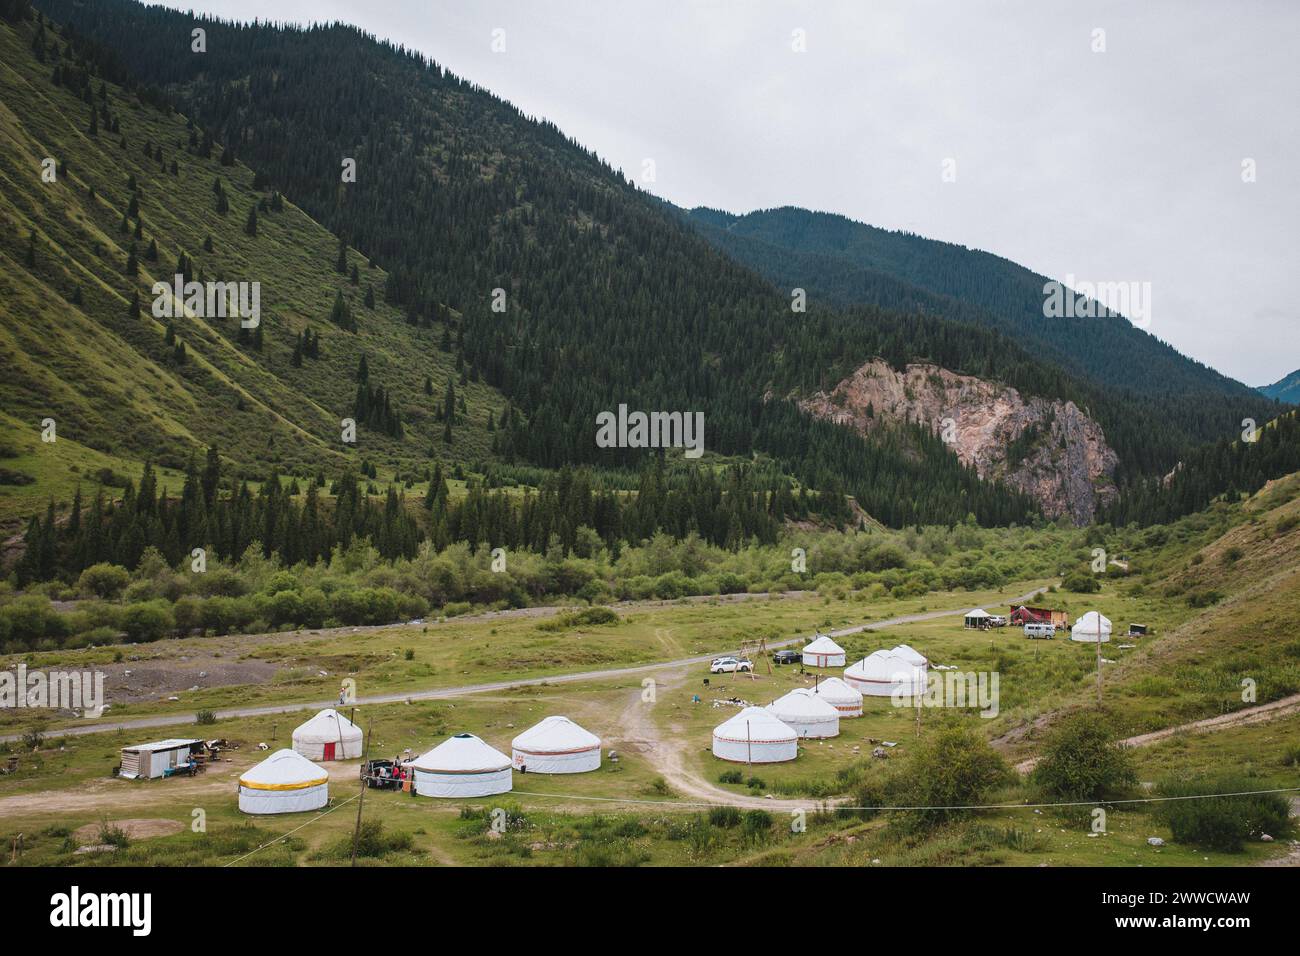 Kyrgyz yurt camp in the mountains of Central Asia. Nomadic village in the valley near the river under cloudy sky. Stock Photo